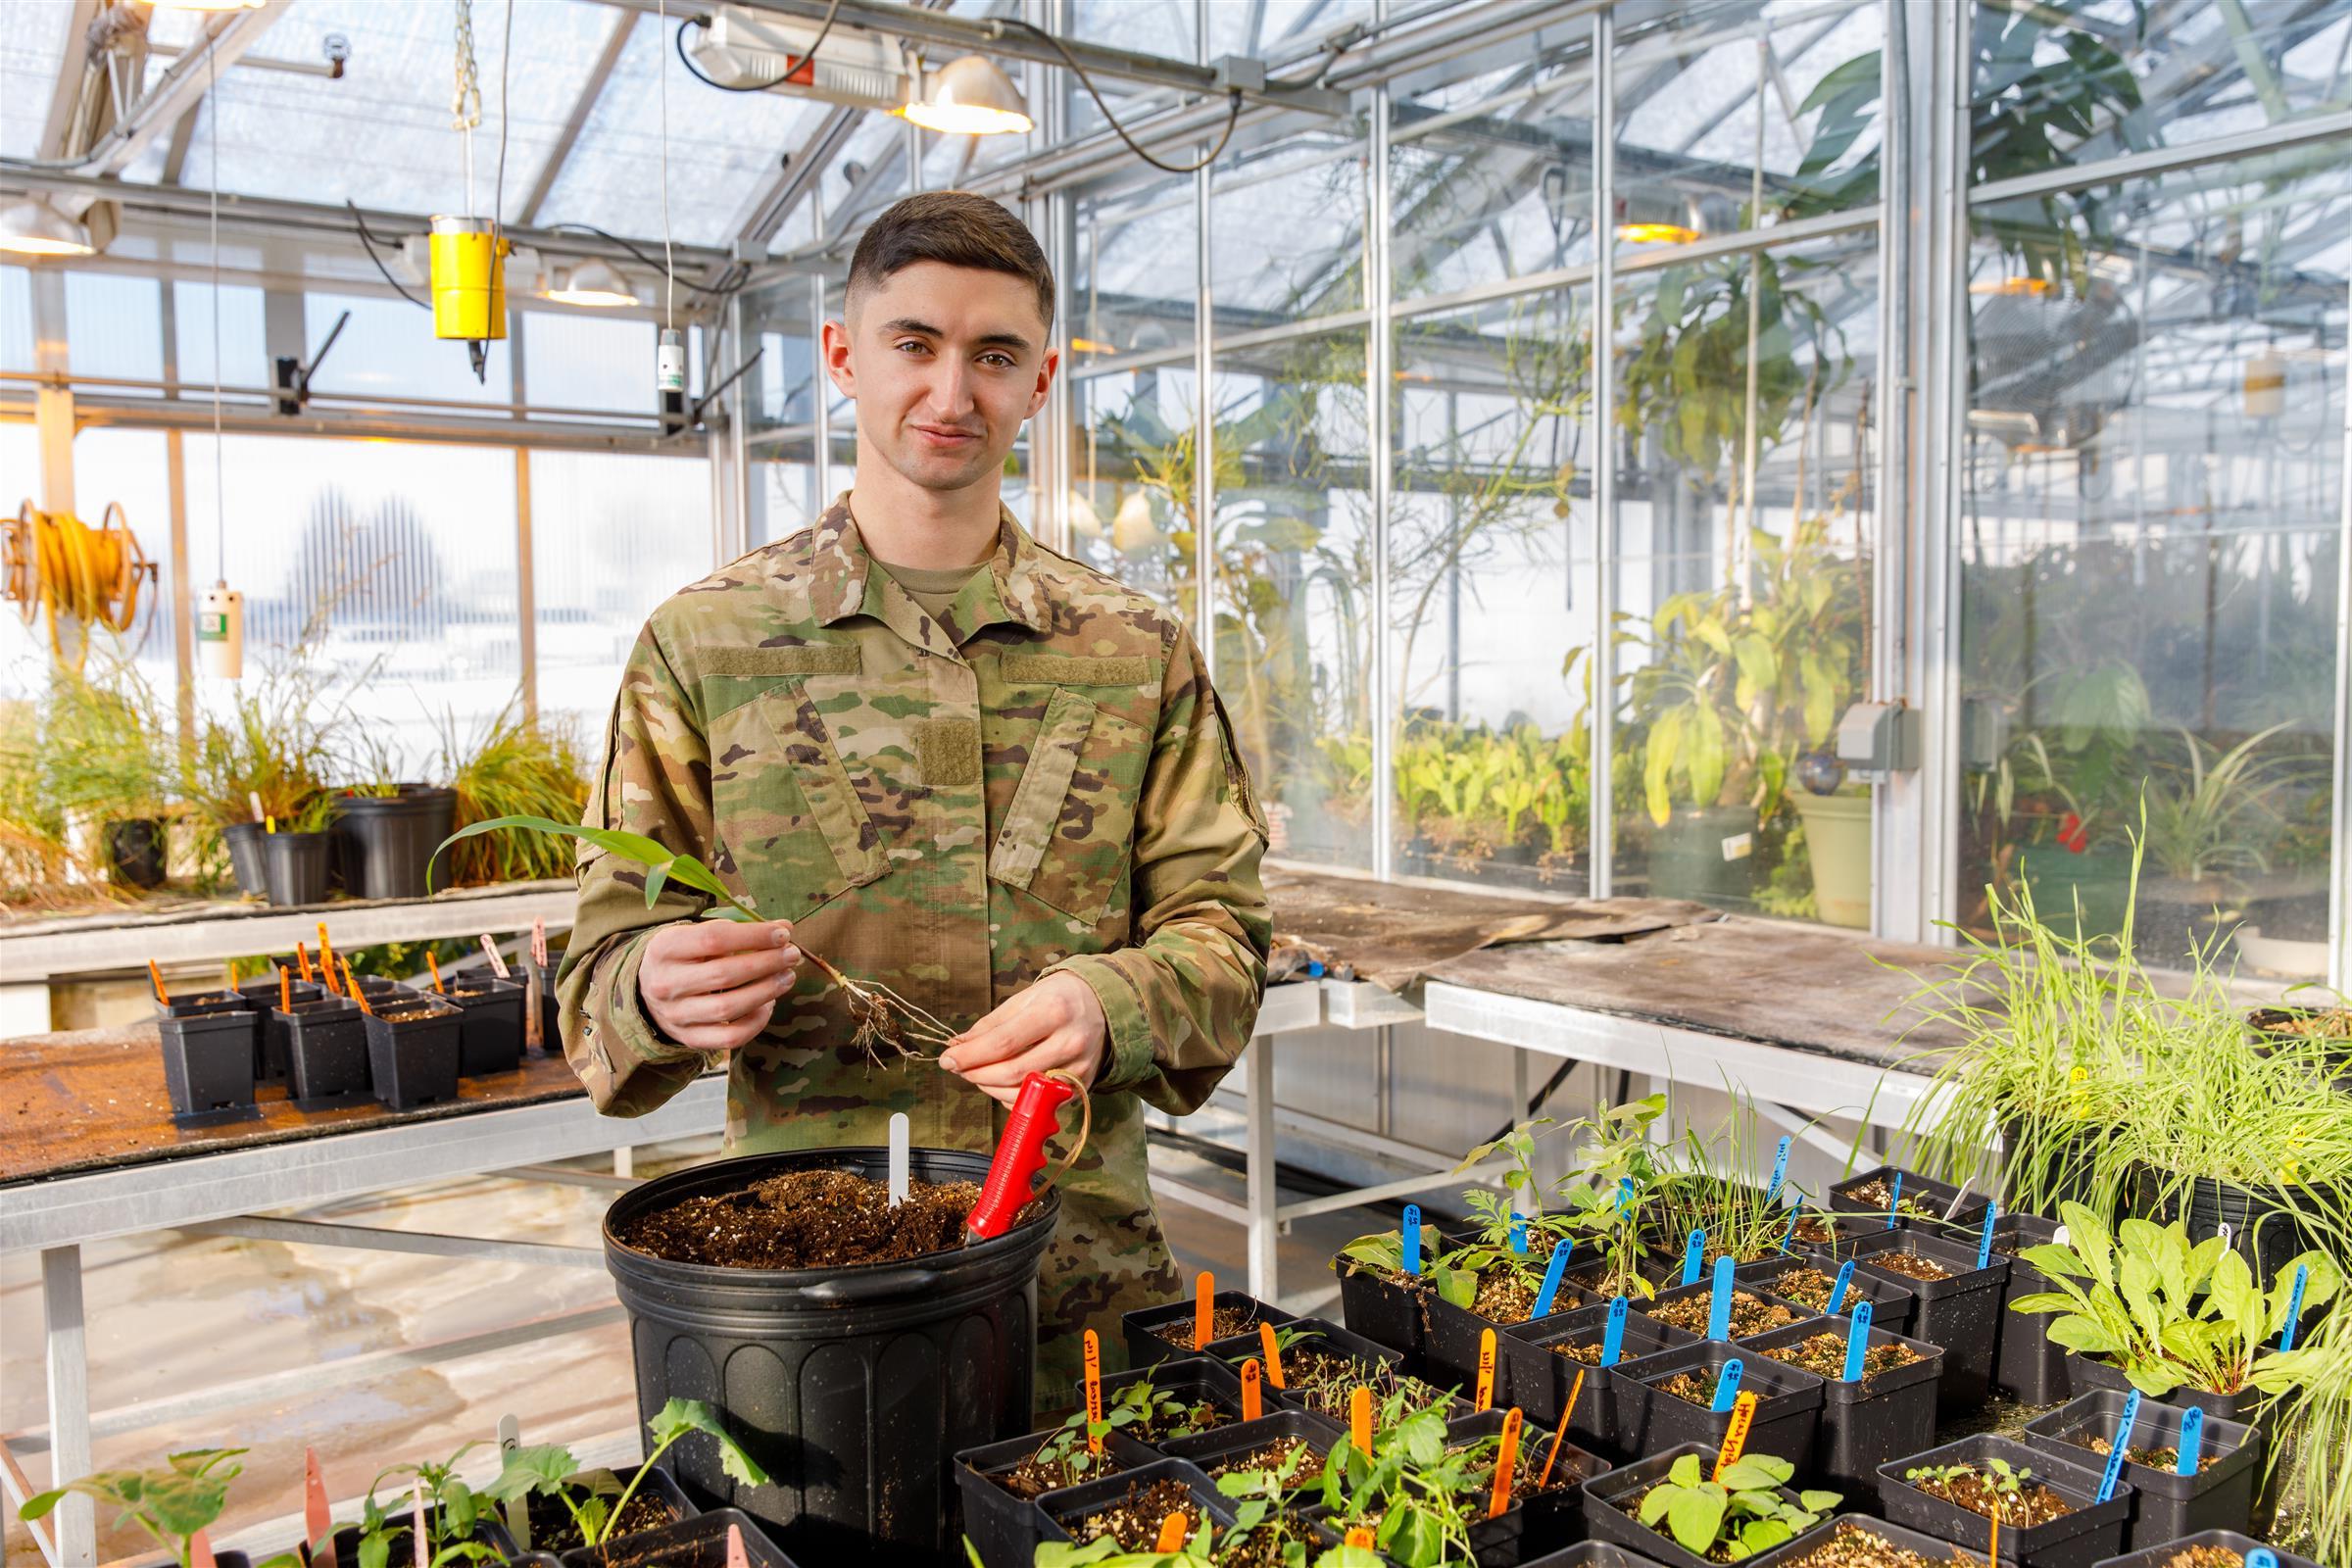 Military student in uniform holding a plant surrounded by plants in pots inside a greenhouse